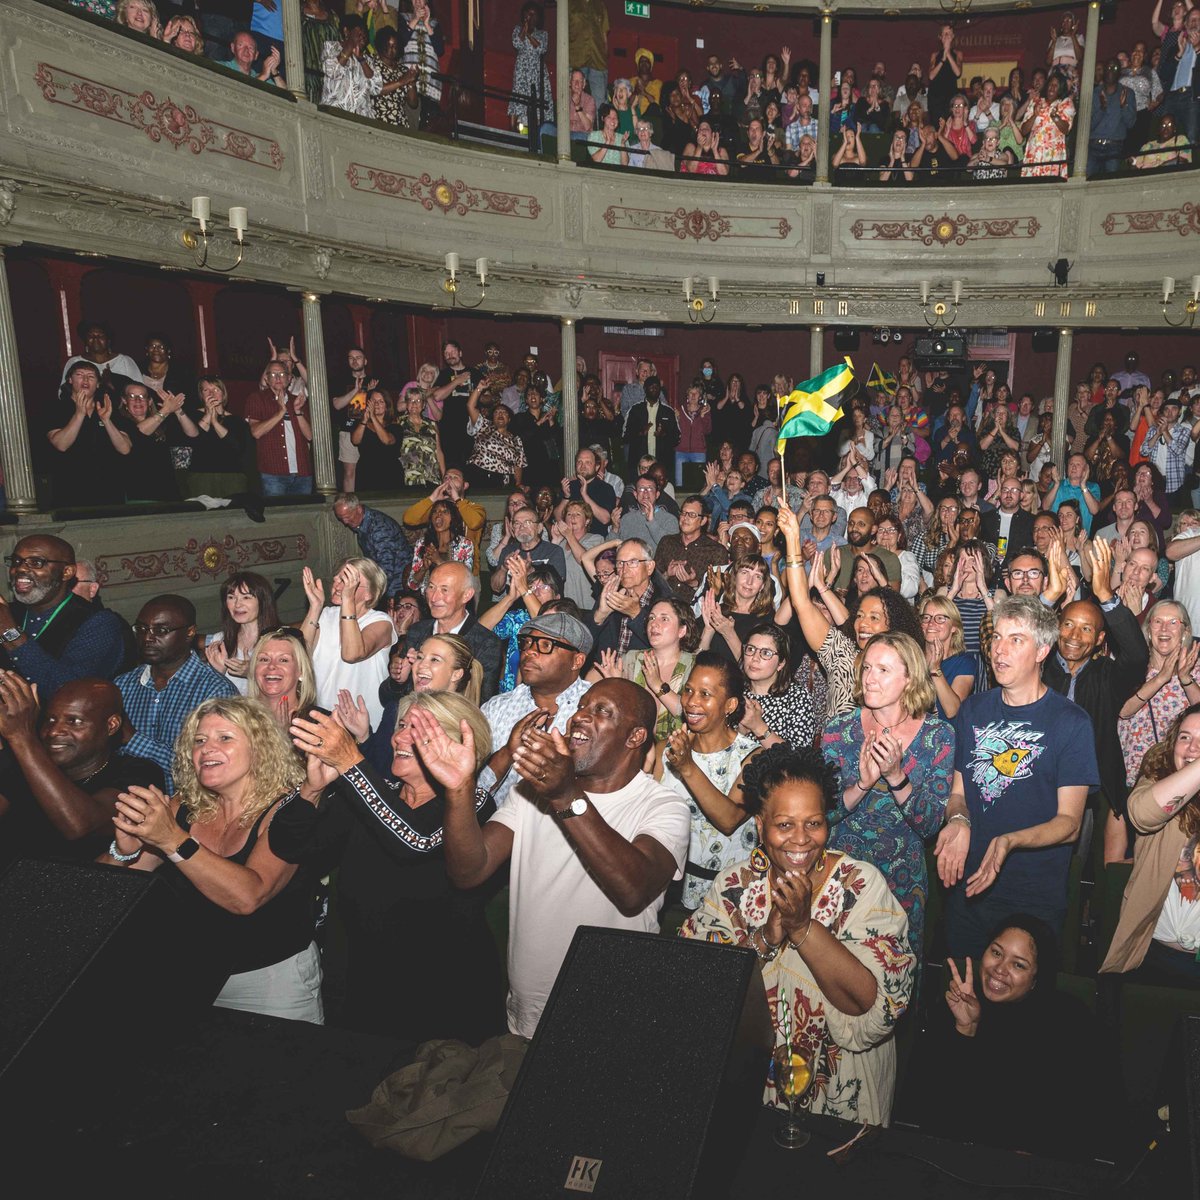 📢Tonight - for one night only - The King Of Reggae returns! The last time, @Rush_TheatreCo blew the roof off BOV performing reggae hits including One Love, No Woman No Cry and Is This Love. Welcome back 😍We can't wait! 📸@JonCraig_Photos